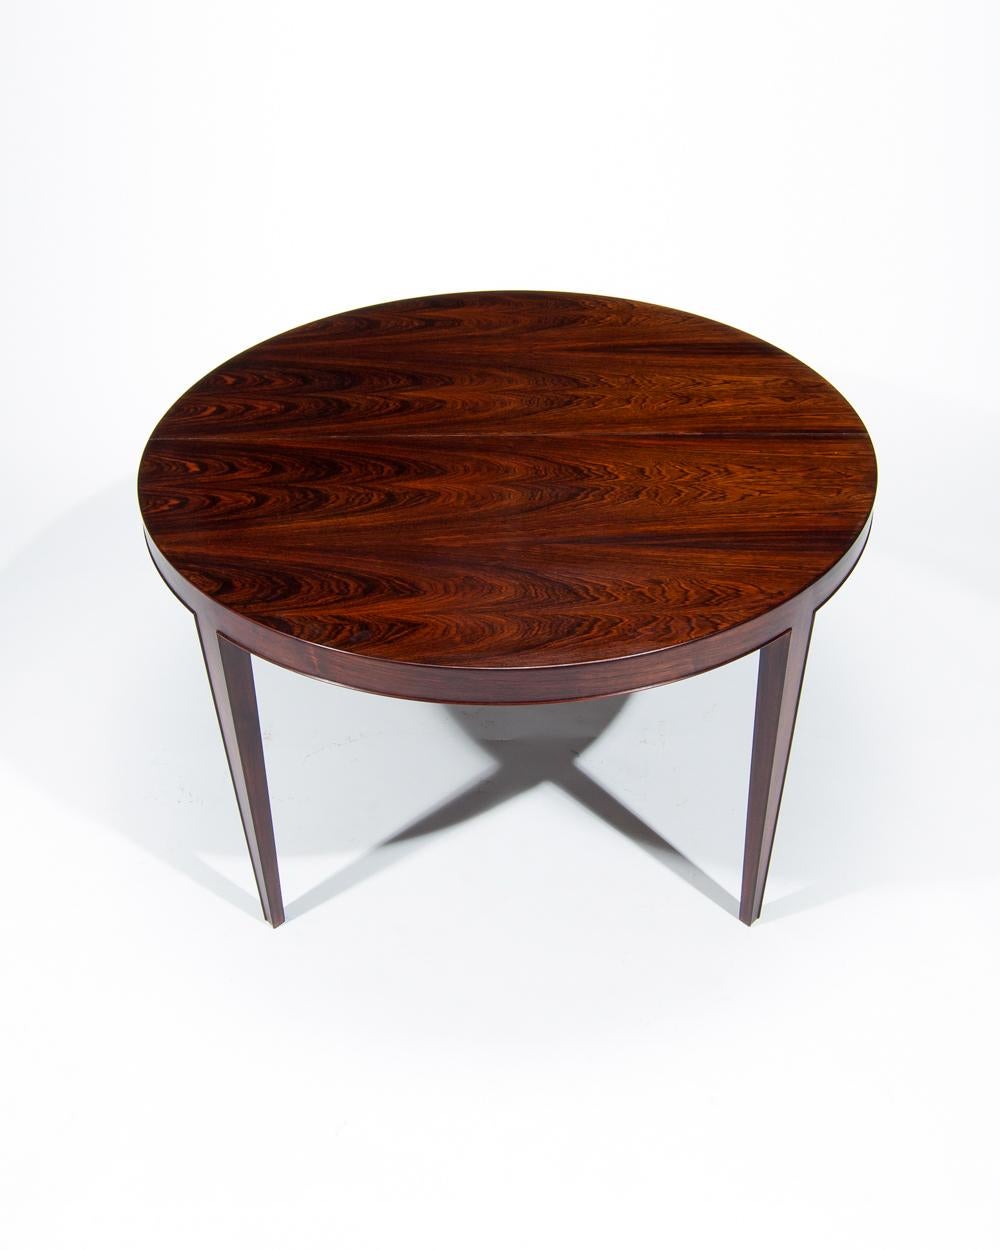 A Danish rosewood dining table with 2 additional extension leaves designed by Severin Hansen for Haslev Møbelfabrik in the 1960’s. A lovely deep rich colour and patina to the rosewood which is shown to amazing effect on this dining table. Beautiful